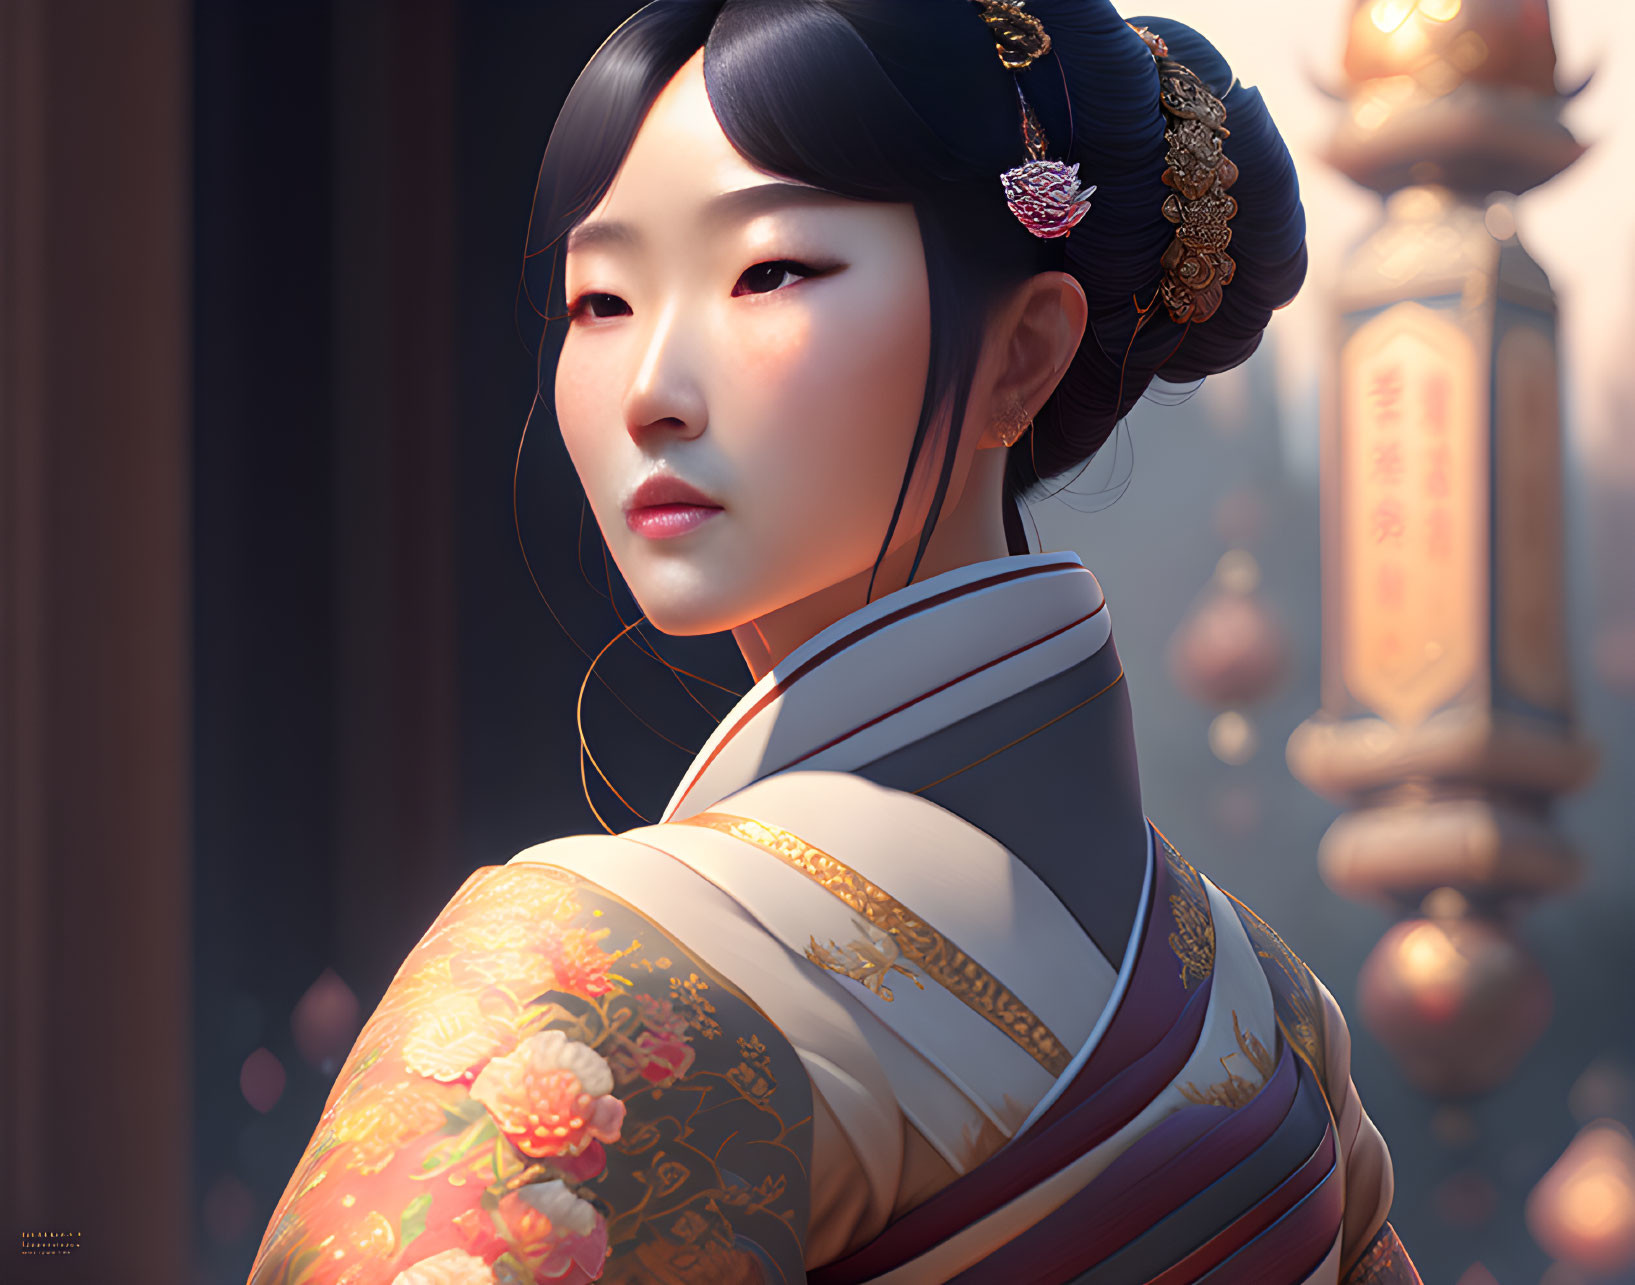 Digital portrait of woman in East Asian attire with gold designs, in warm light with temple lanterns